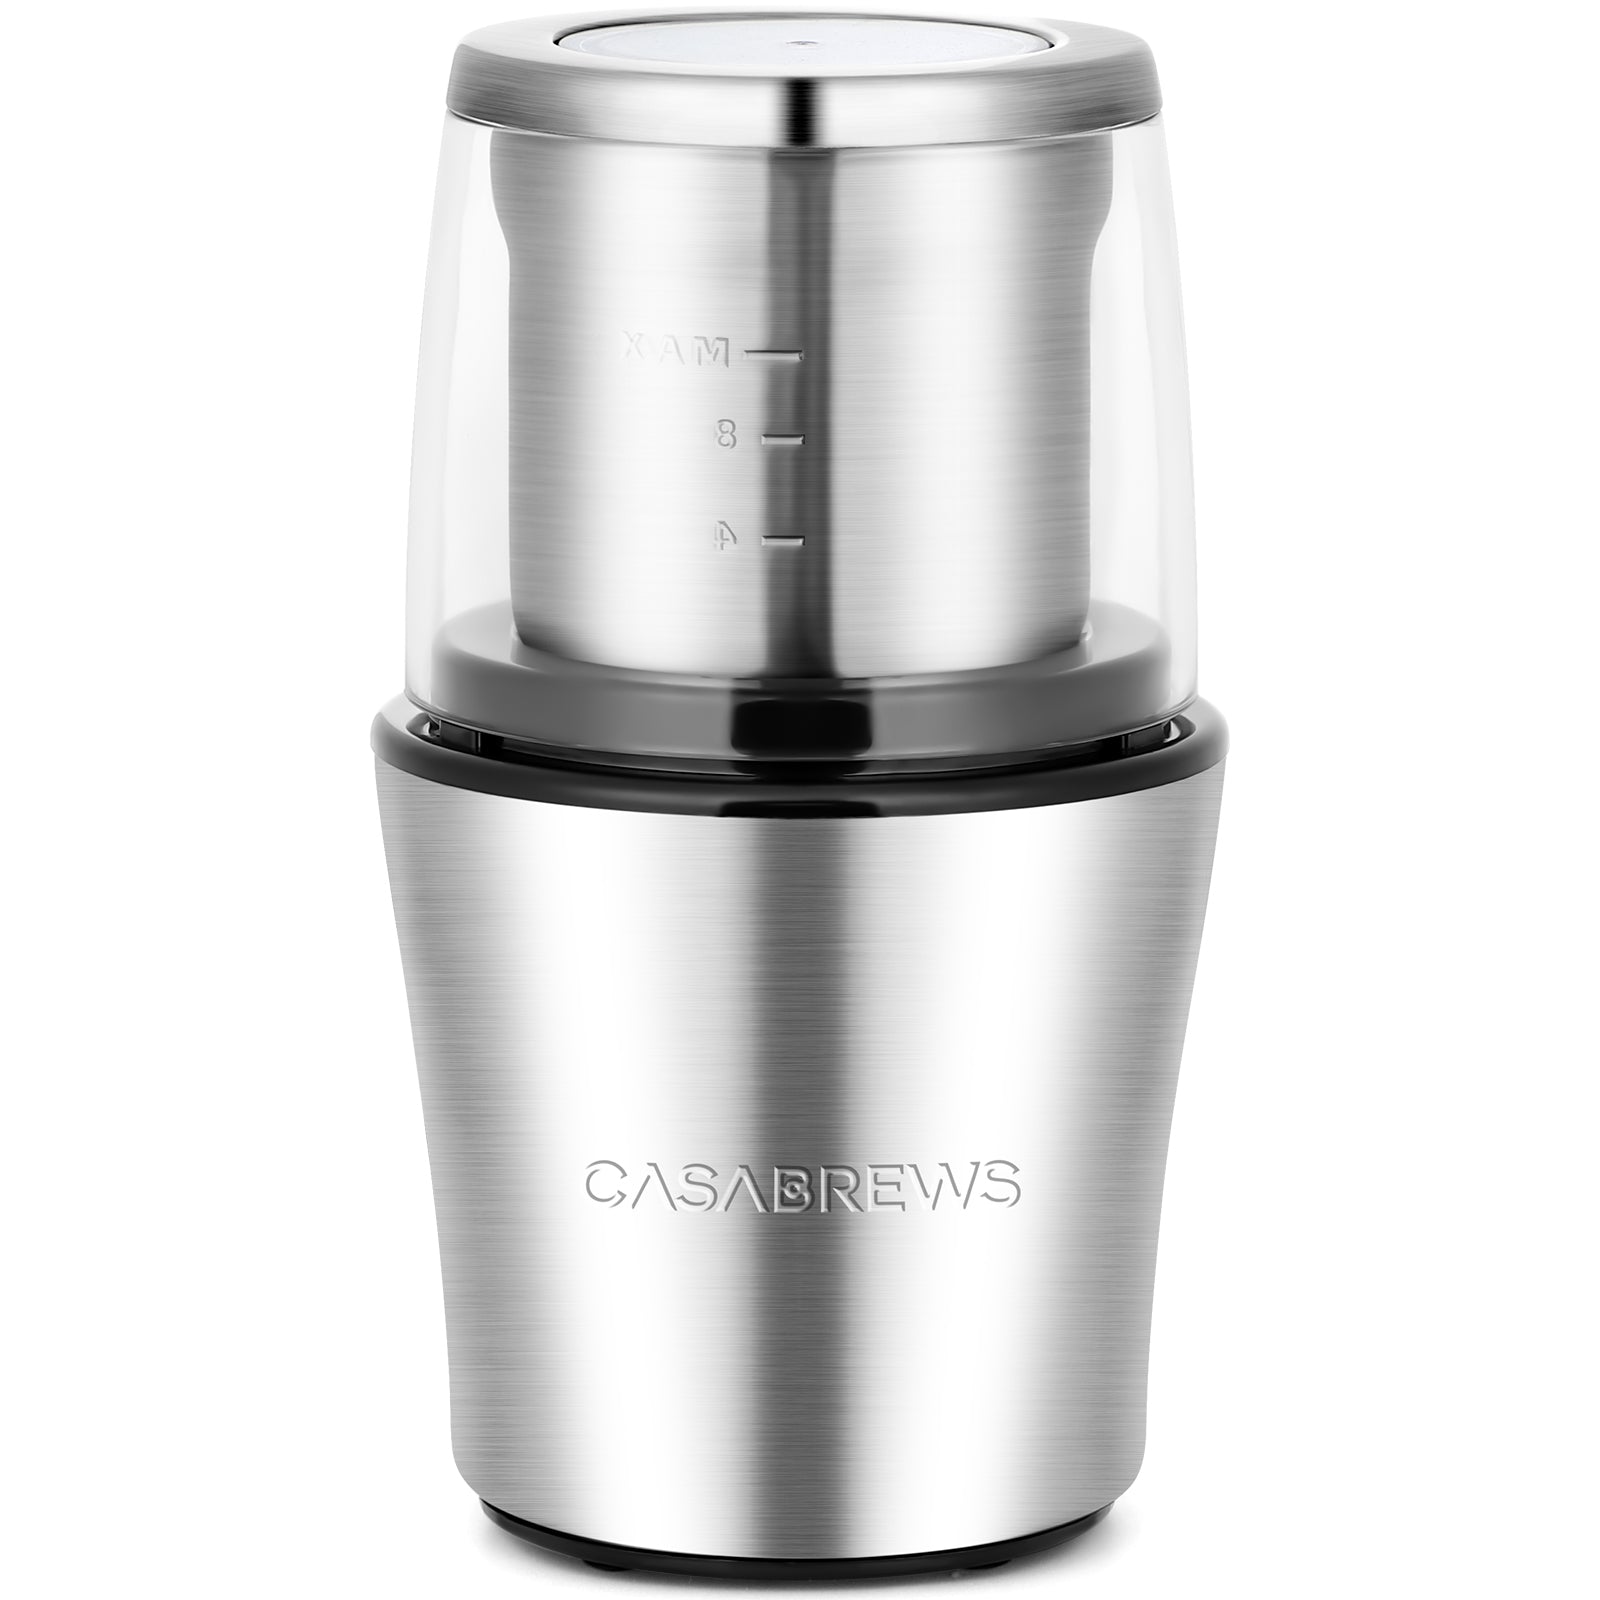 CASABREWS KWG-130 Electric Coffee Grinder with One-touch Operation